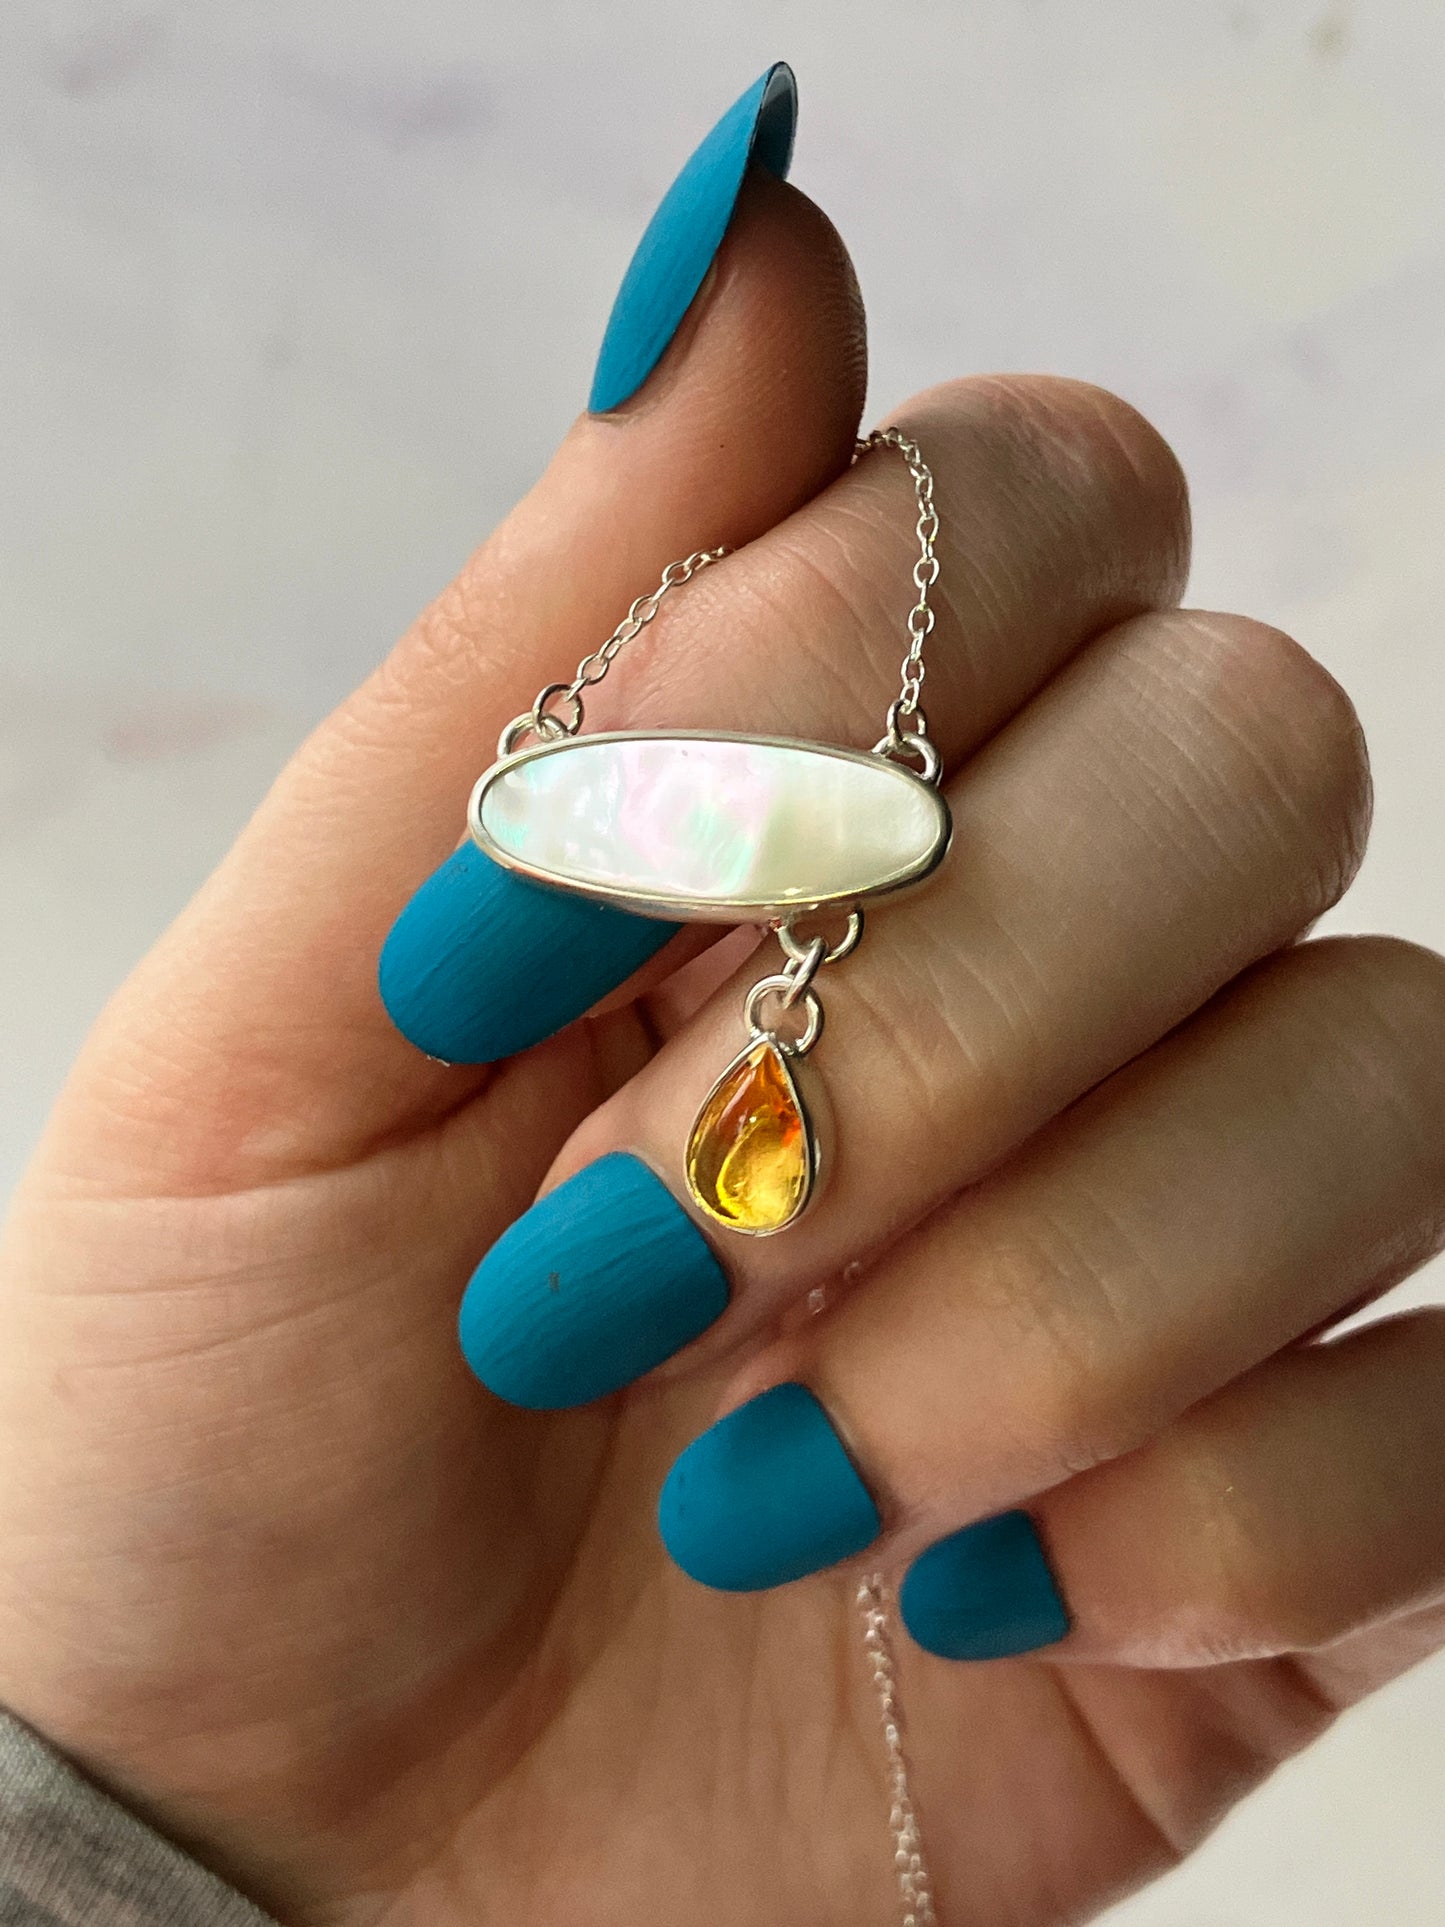 Piña Colada - Mother of Pearl, Citrine and Sterling Silver Necklace with Sterling Silver Chain